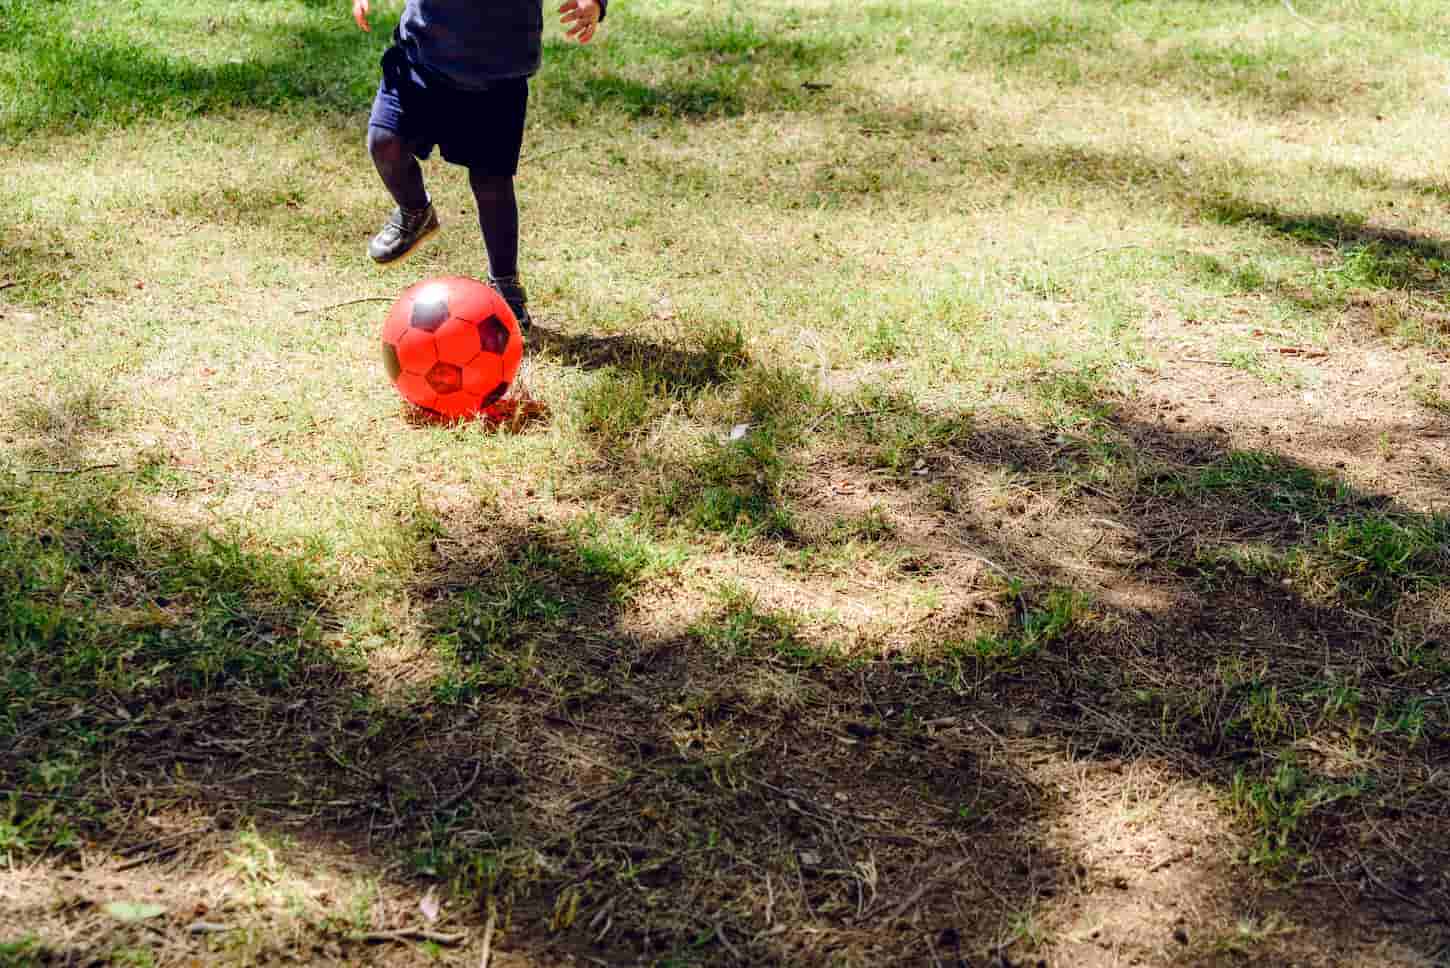 An image of a Child playing with a red plastic football ball.